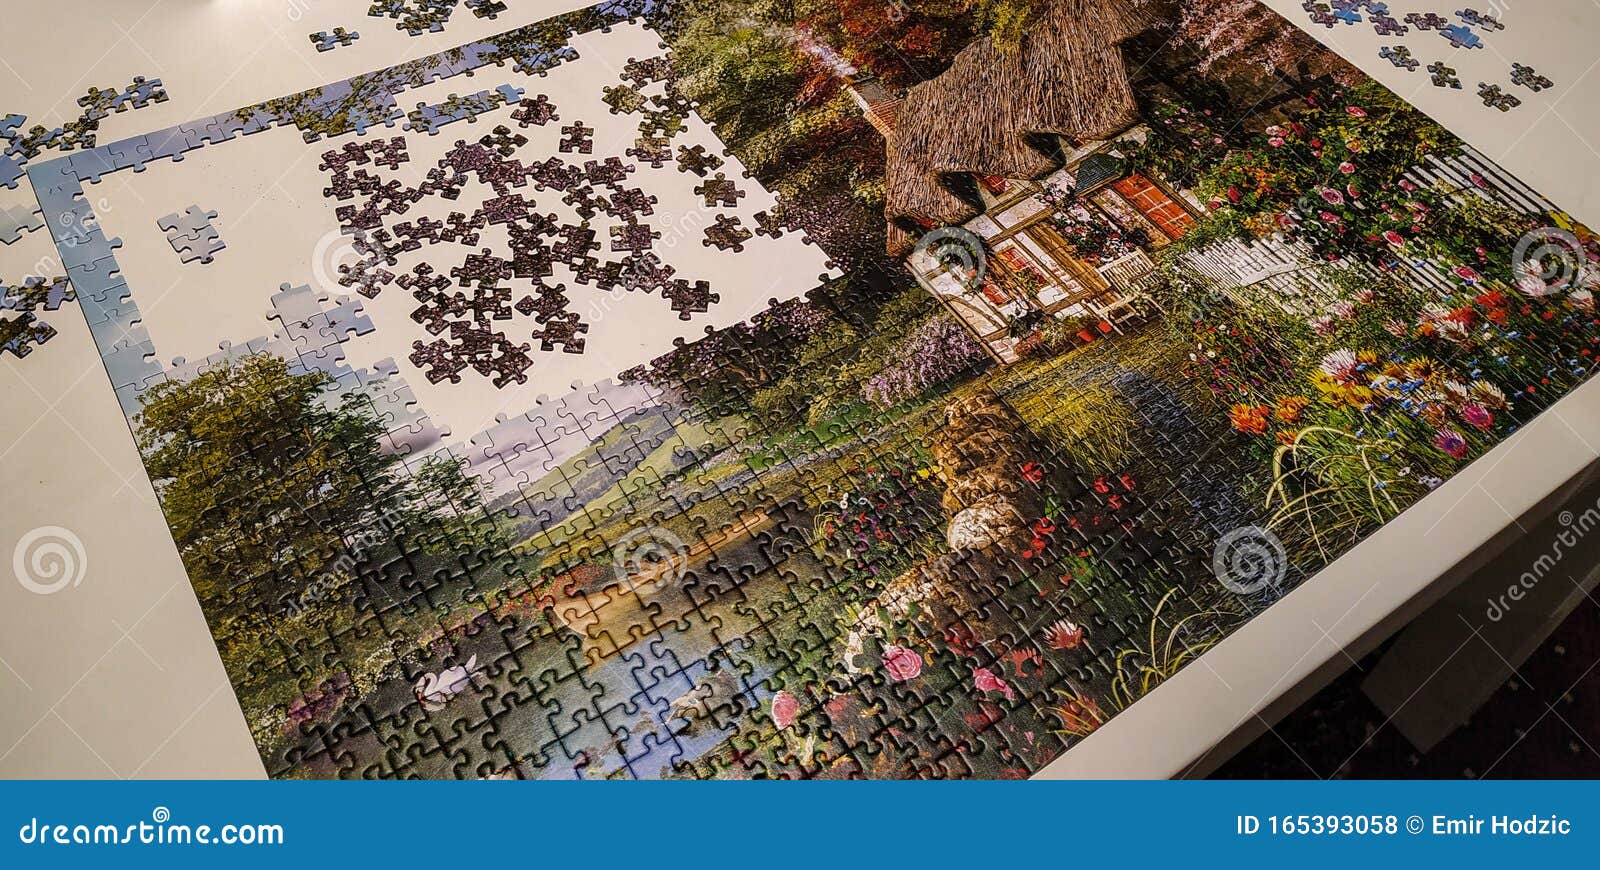 almost finished very complicated and huge puzzle with natural picture